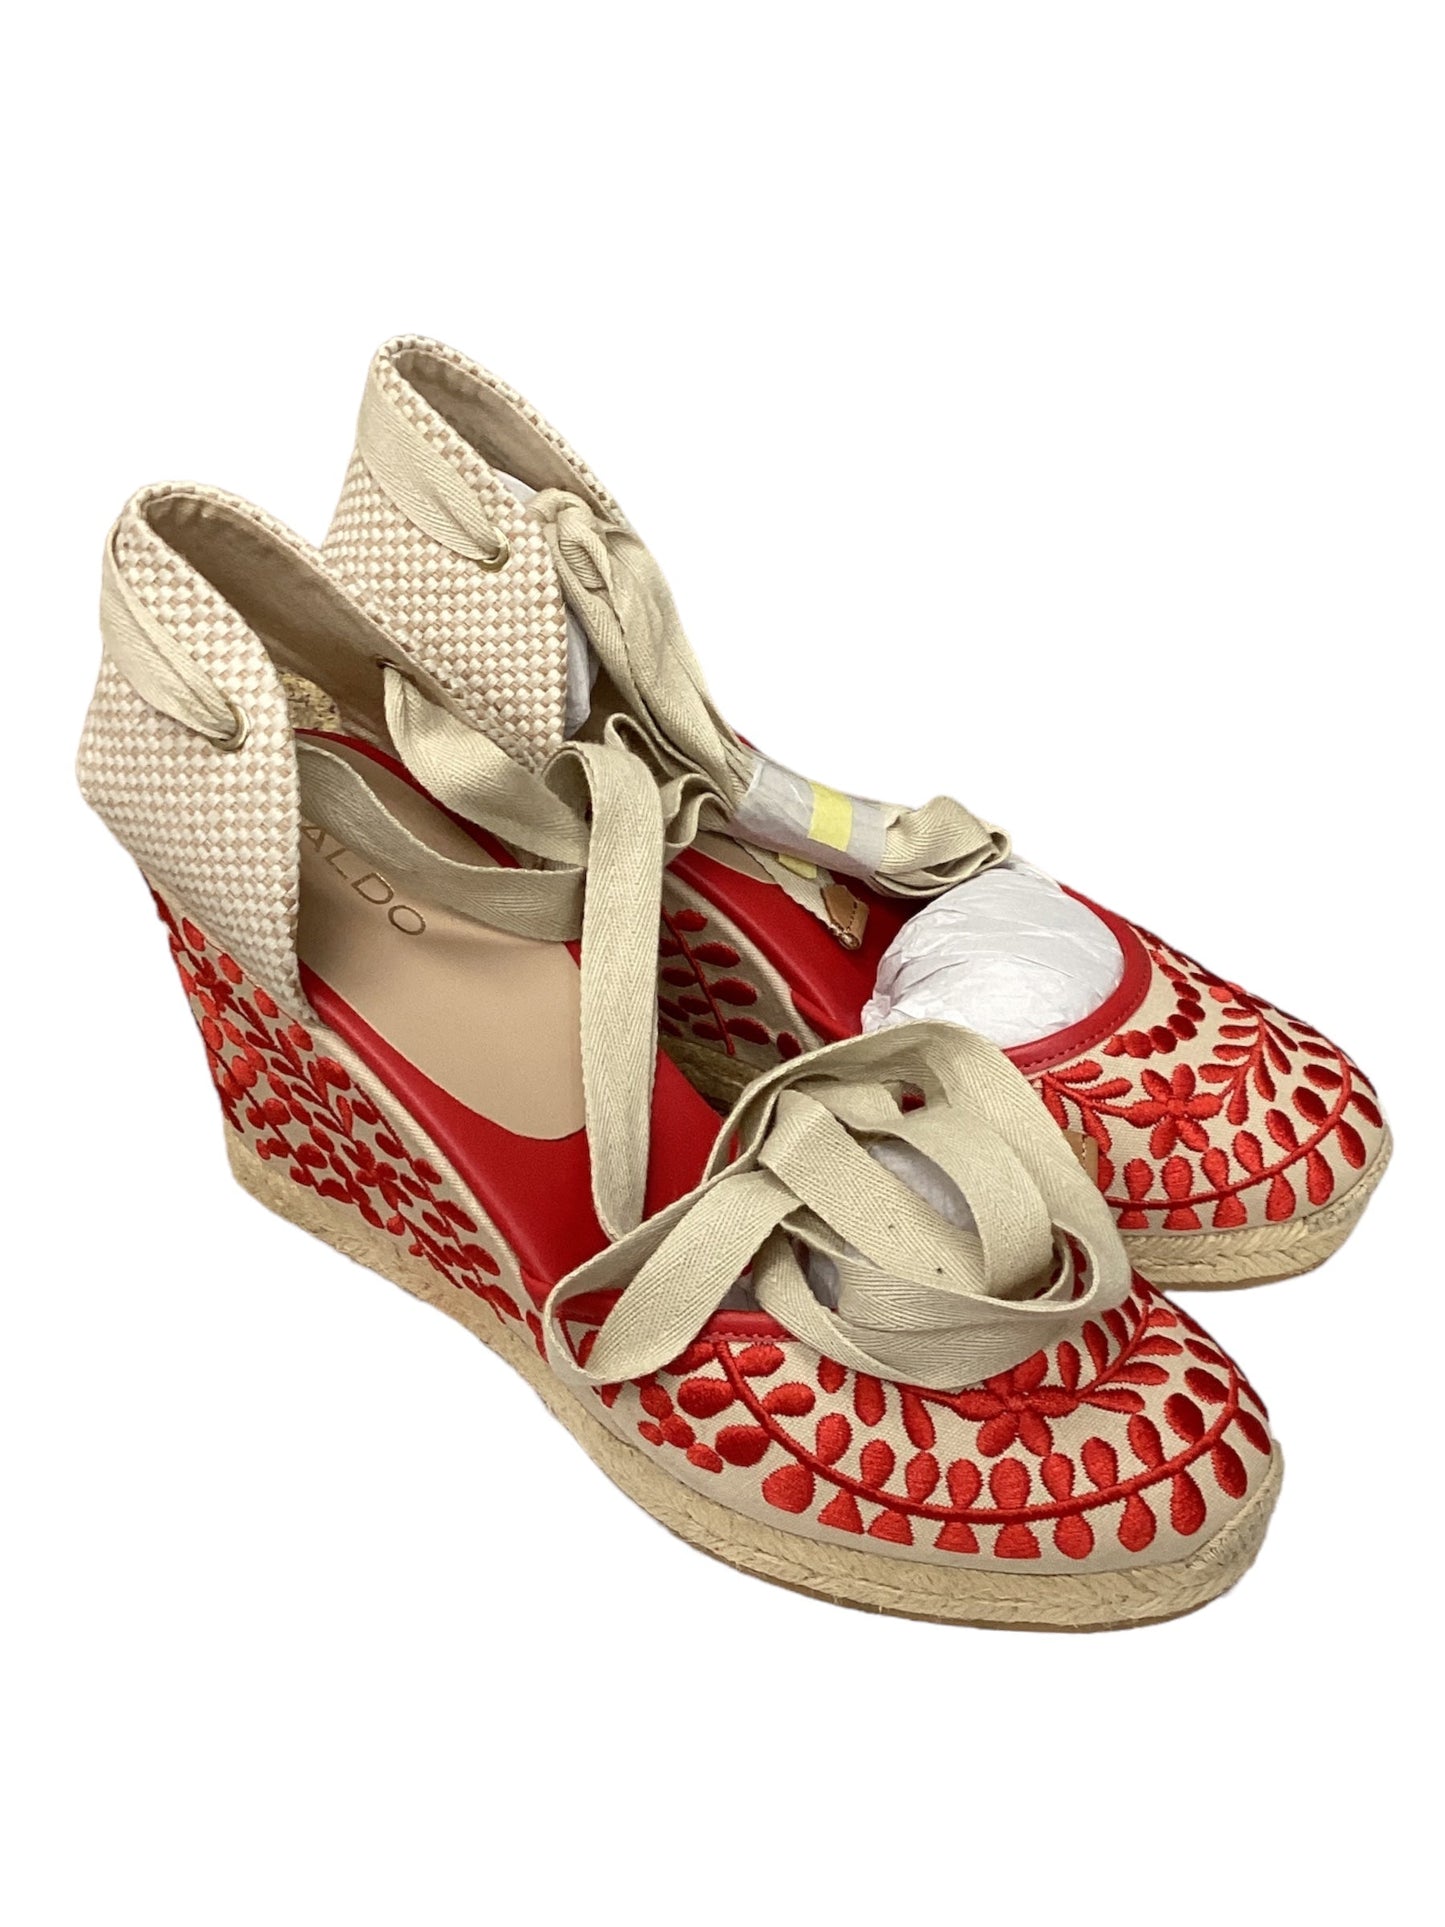 Red & Tan Shoes Heels Wedge Aldo, Size 10